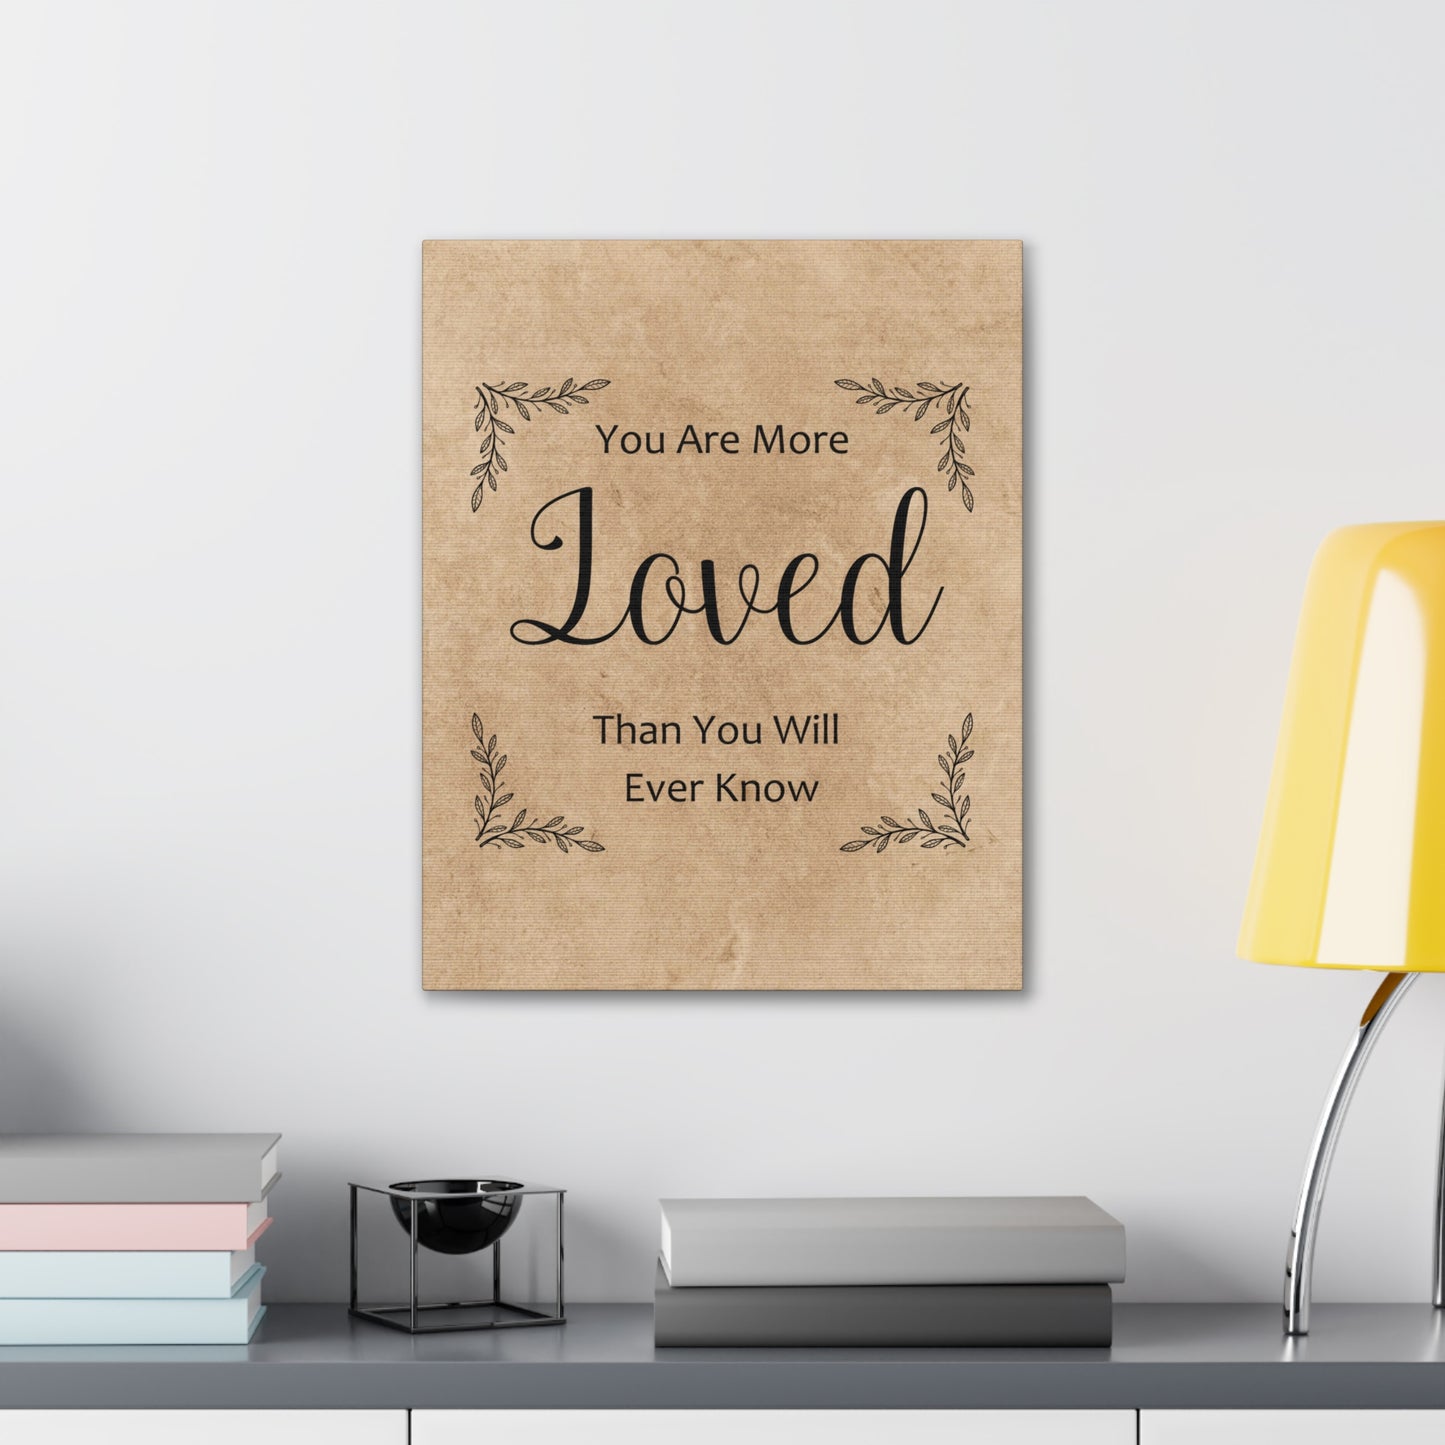 "You Are More Loved Than You Will Ever Know" Wall Art - Weave Got Gifts - Unique Gifts You Won’t Find Anywhere Else!